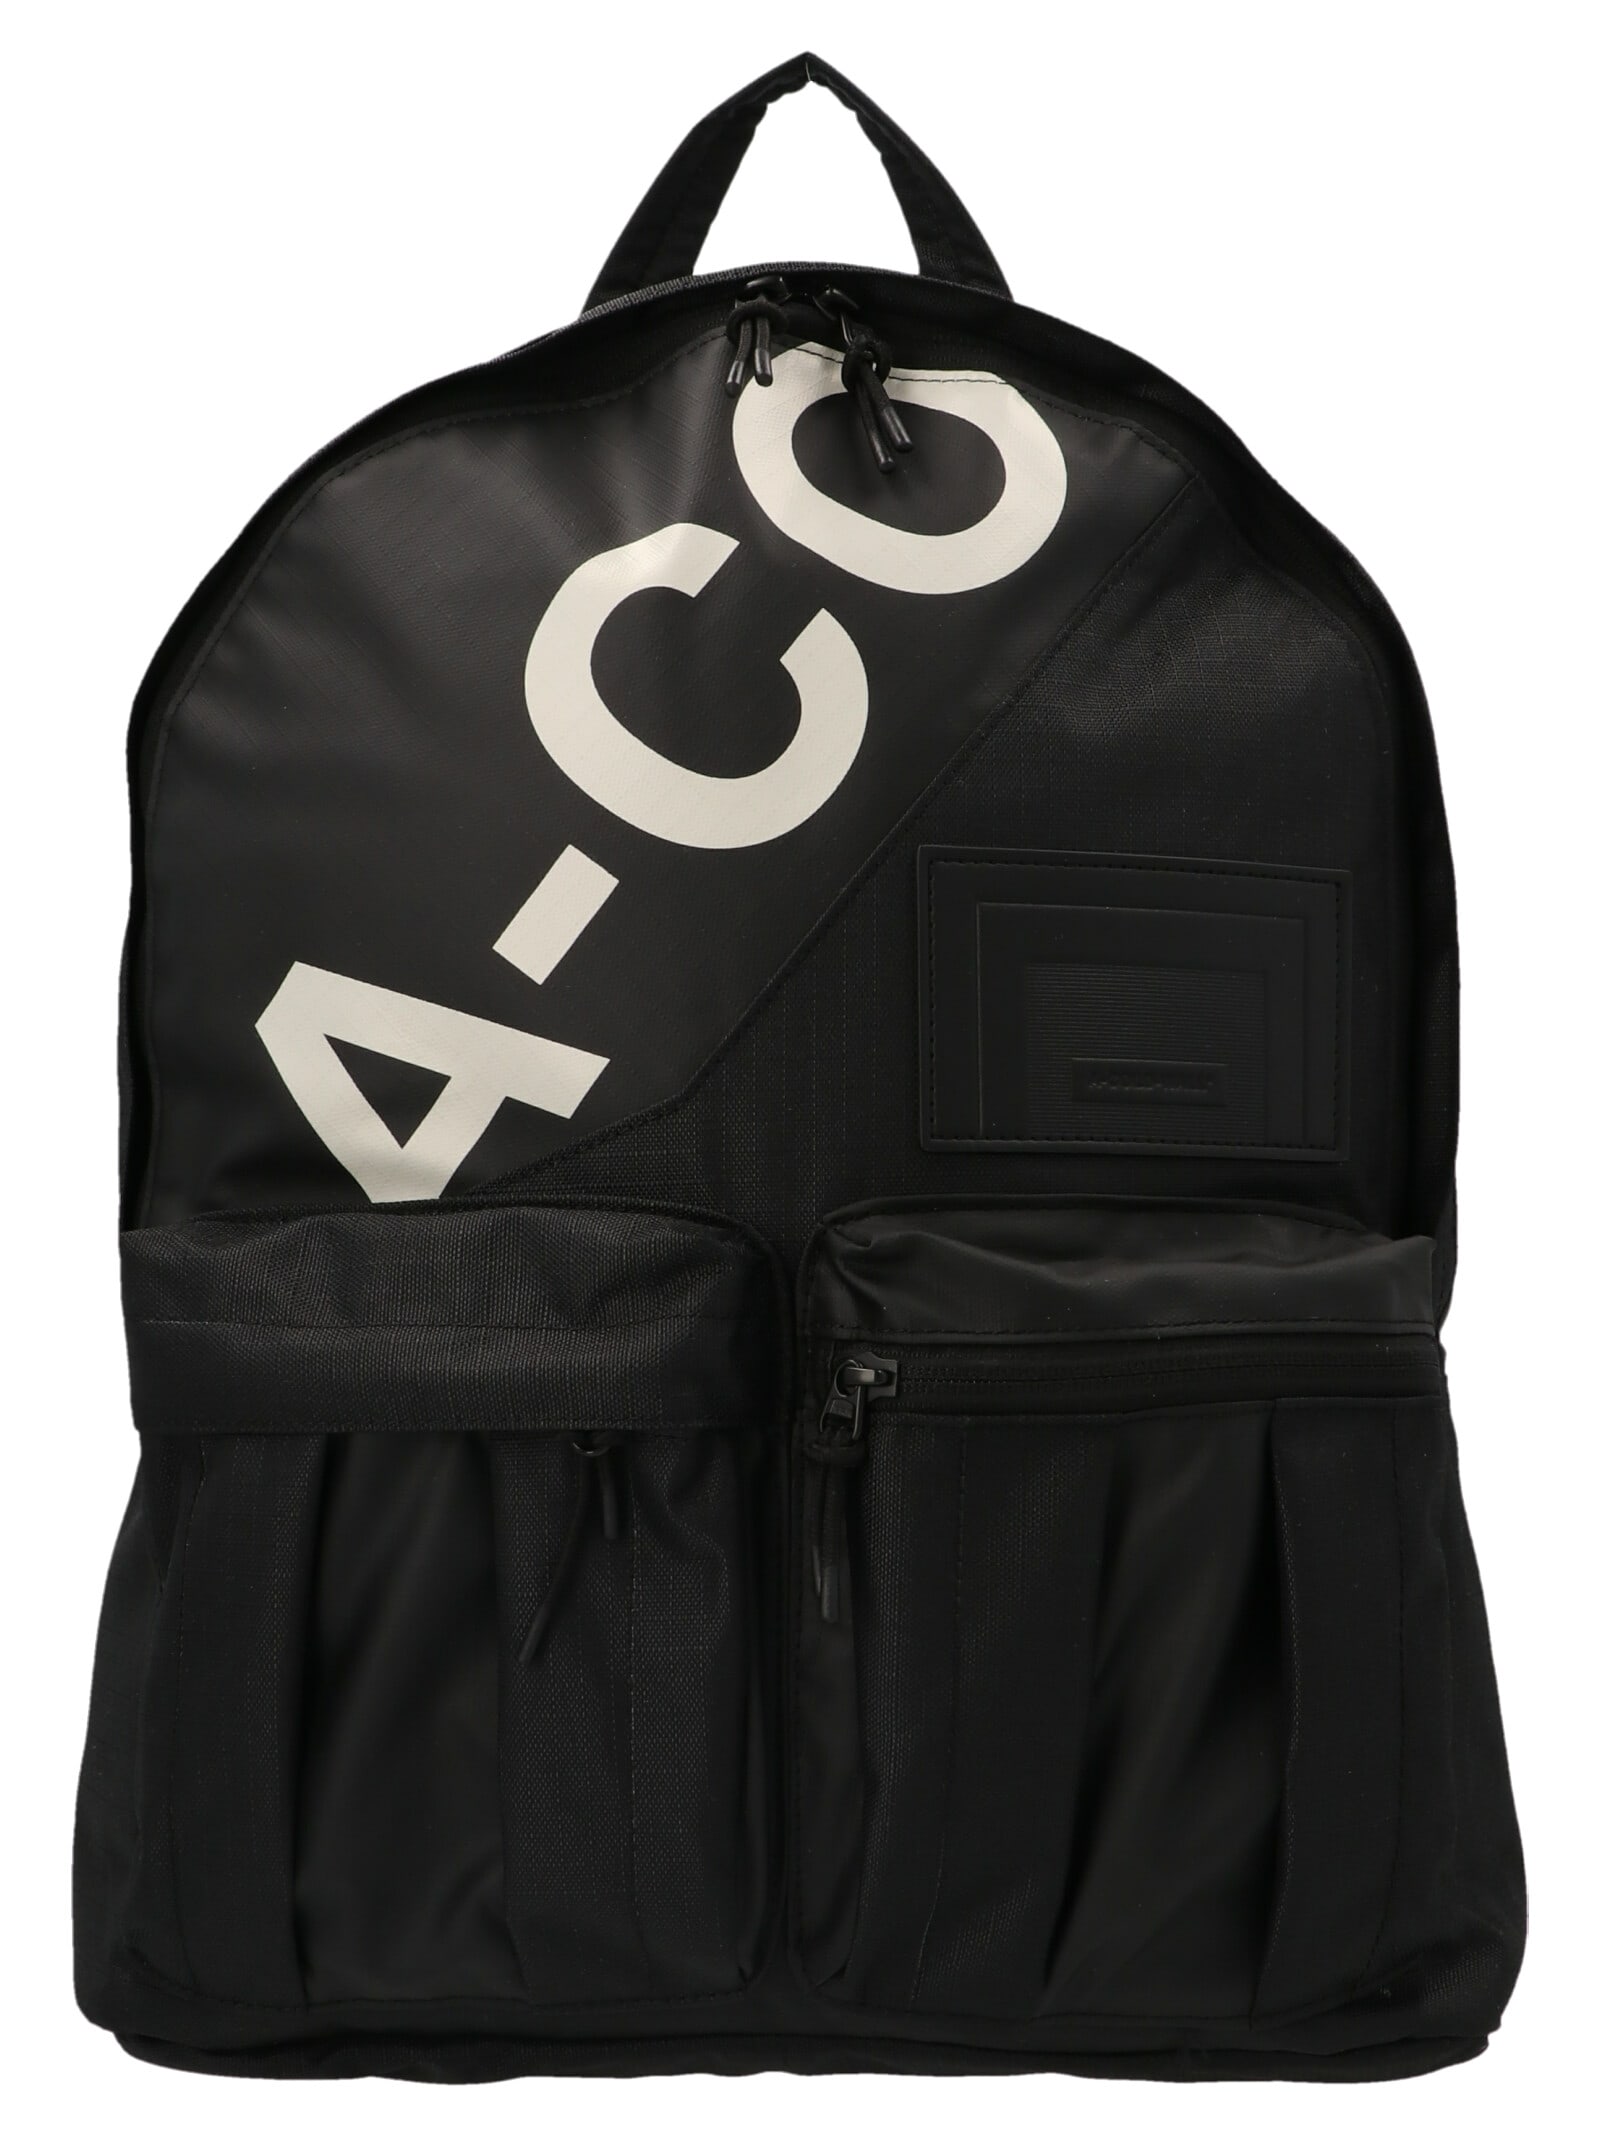 A-COLD-WALL type Graphic Backpack